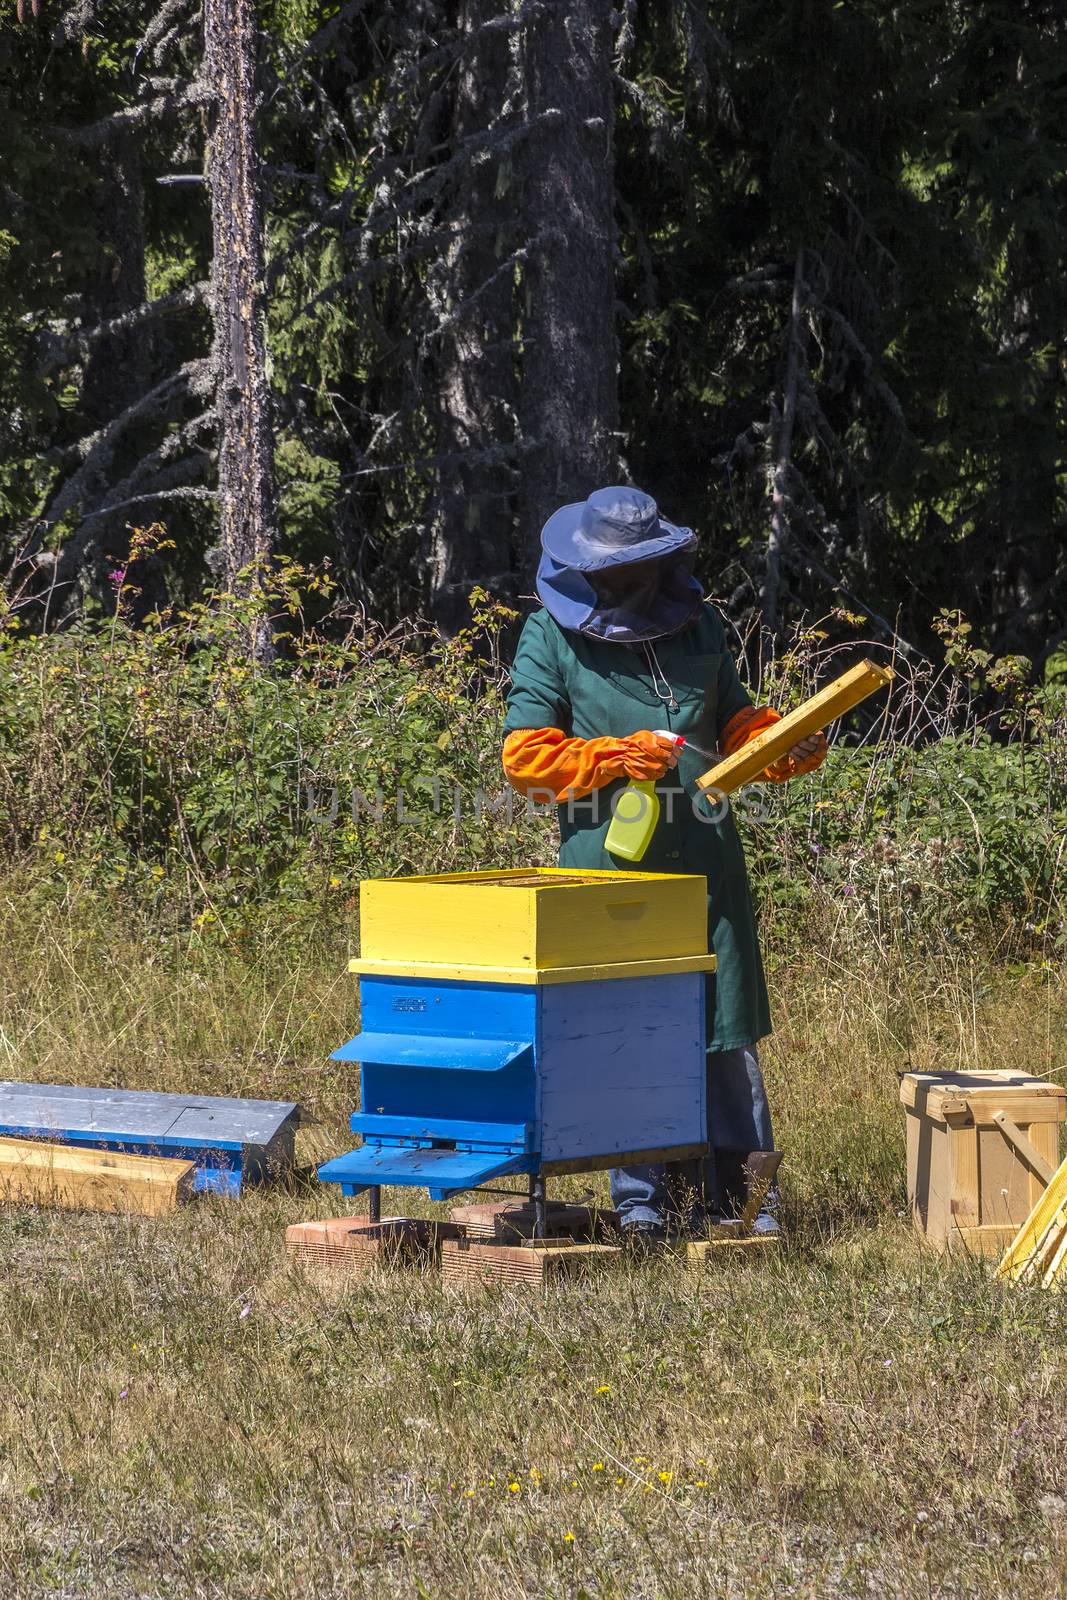 A man works in an apiary collecting bee honey